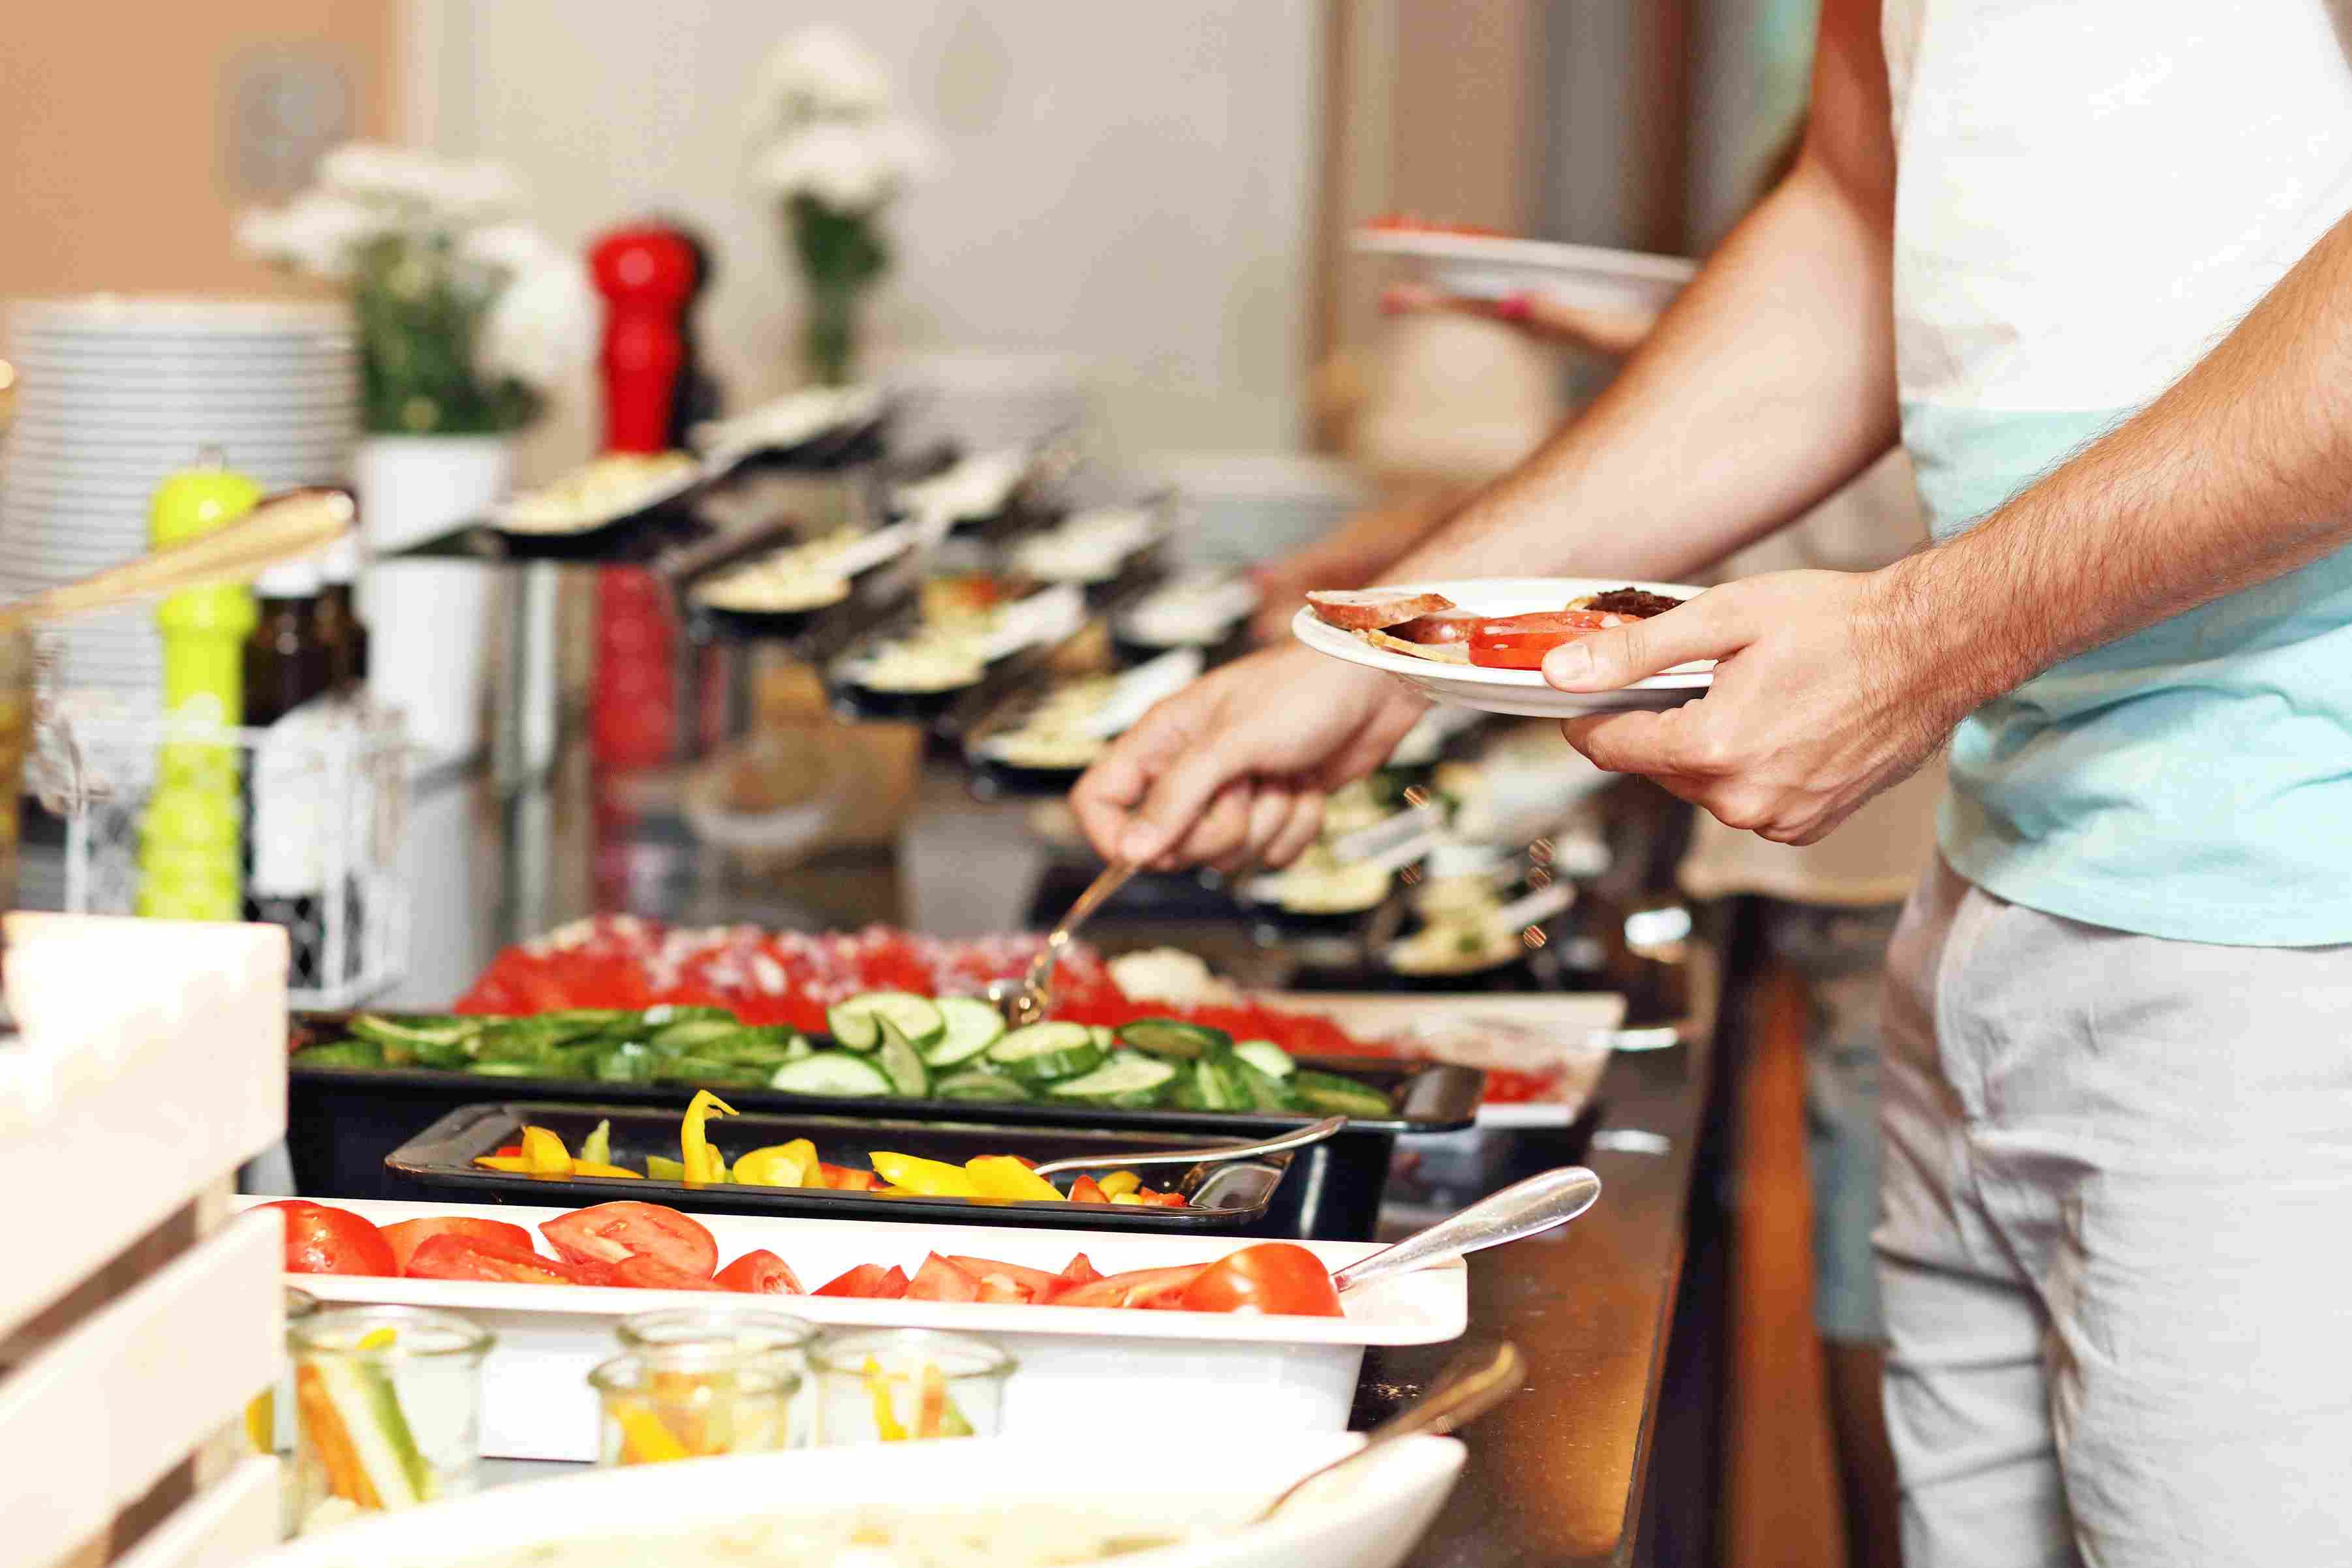 One of the types of restaurant services is buffet service